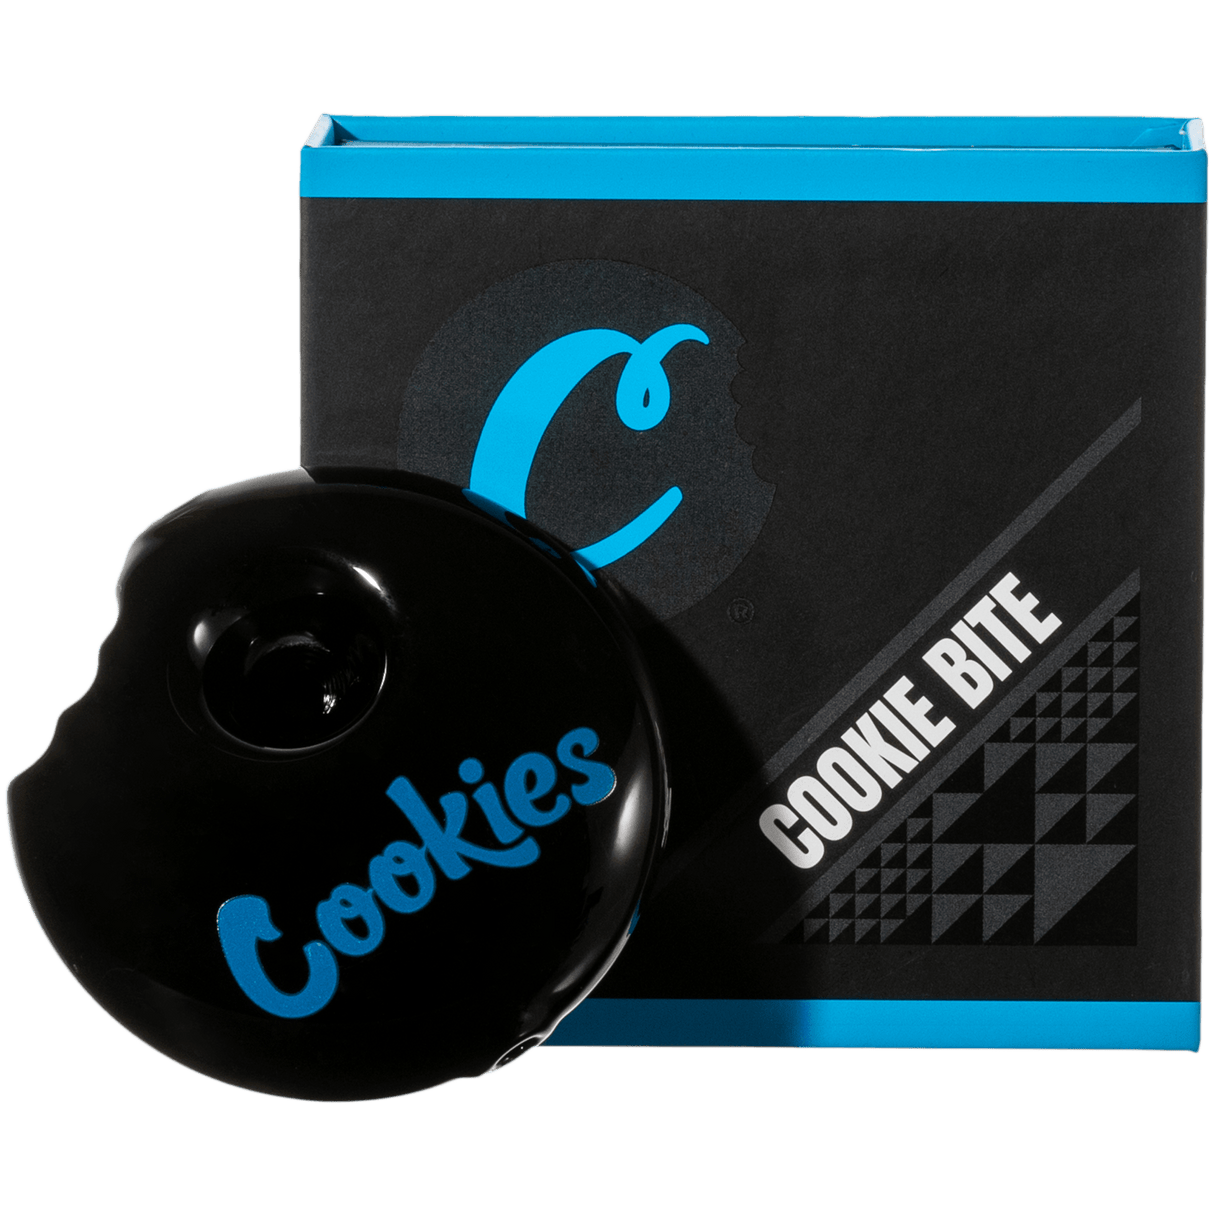 Cookies Bite Pipe, black borosilicate glass spoon pipe with logo, front view on packaging